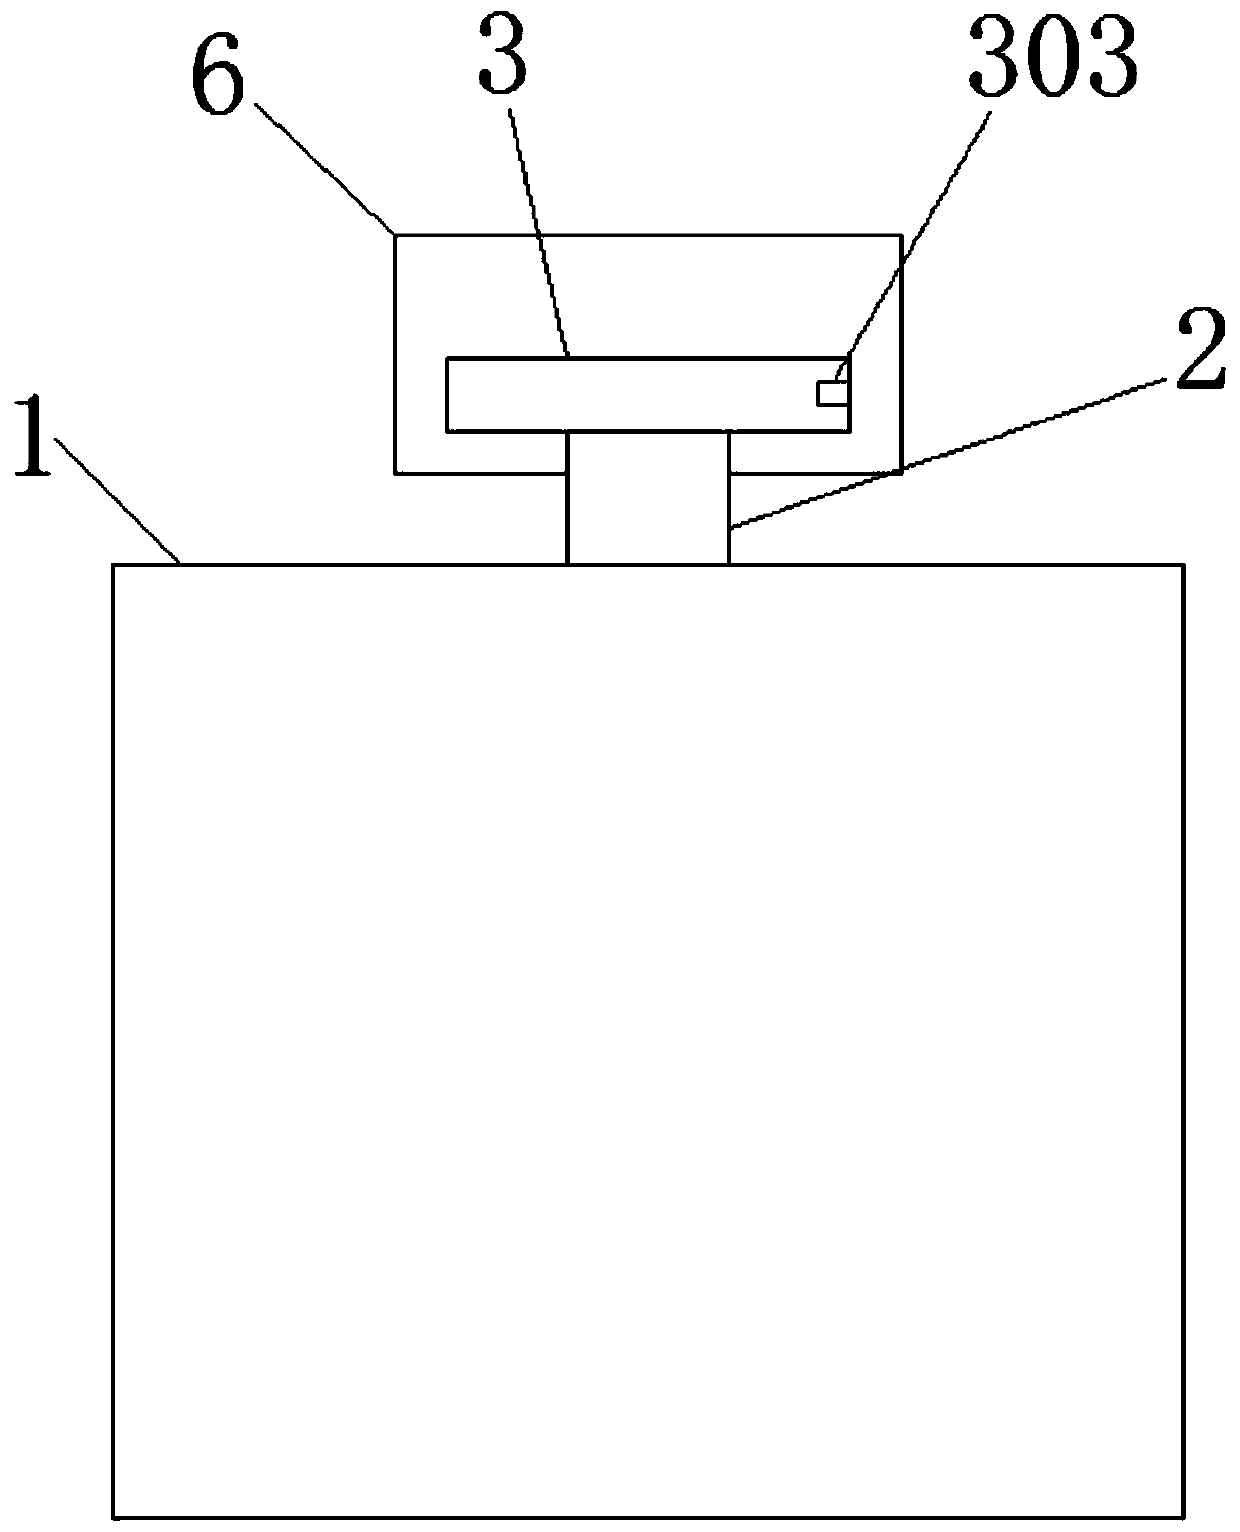 Adjustable auxiliary device for uniformly dyeing textile fabric